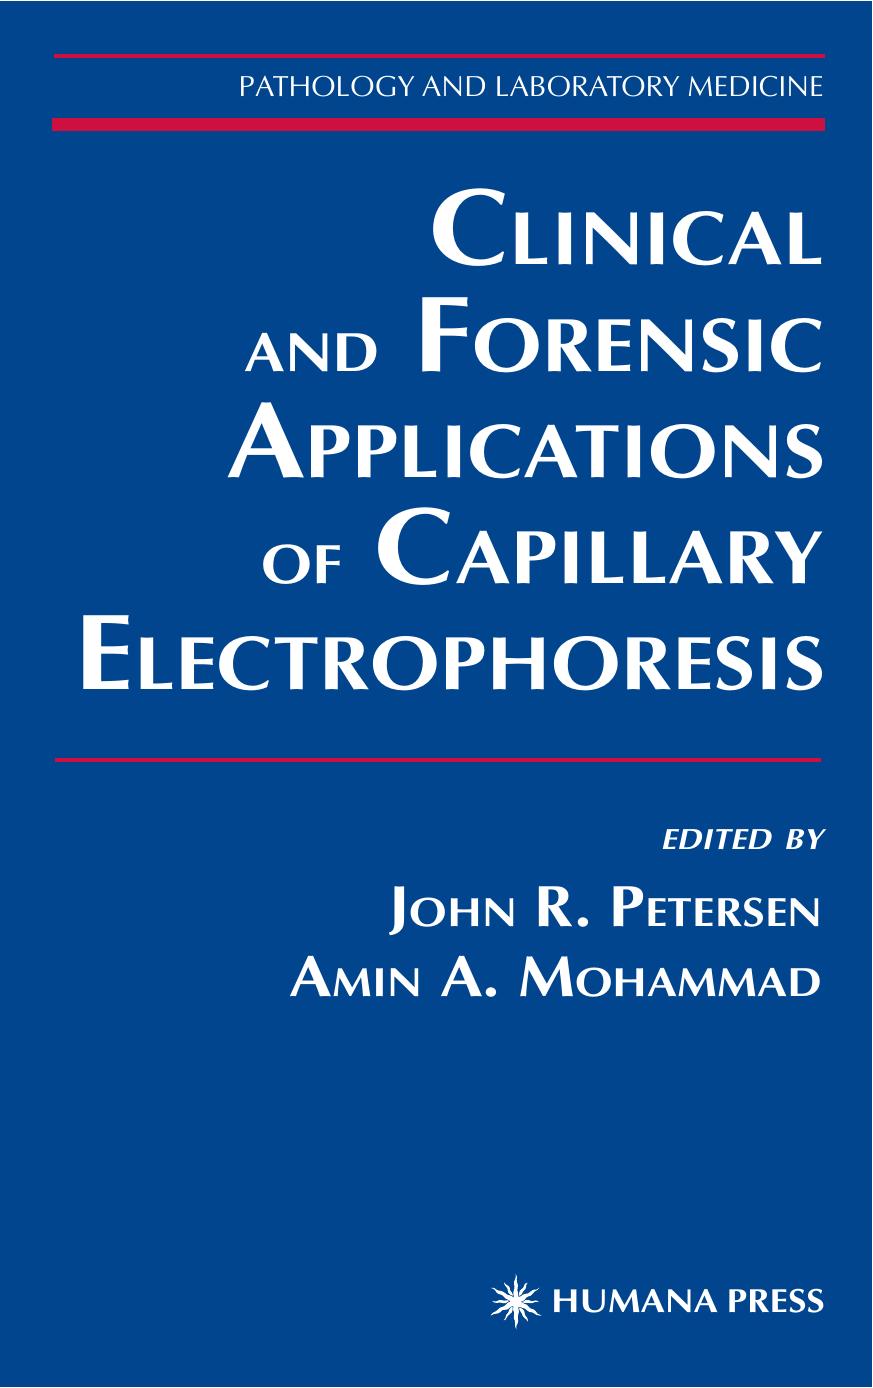 Clinical and Forensic Applications of Capillary Electrophoresis (Pathology and Laboratory Medicine) 2001.pdf